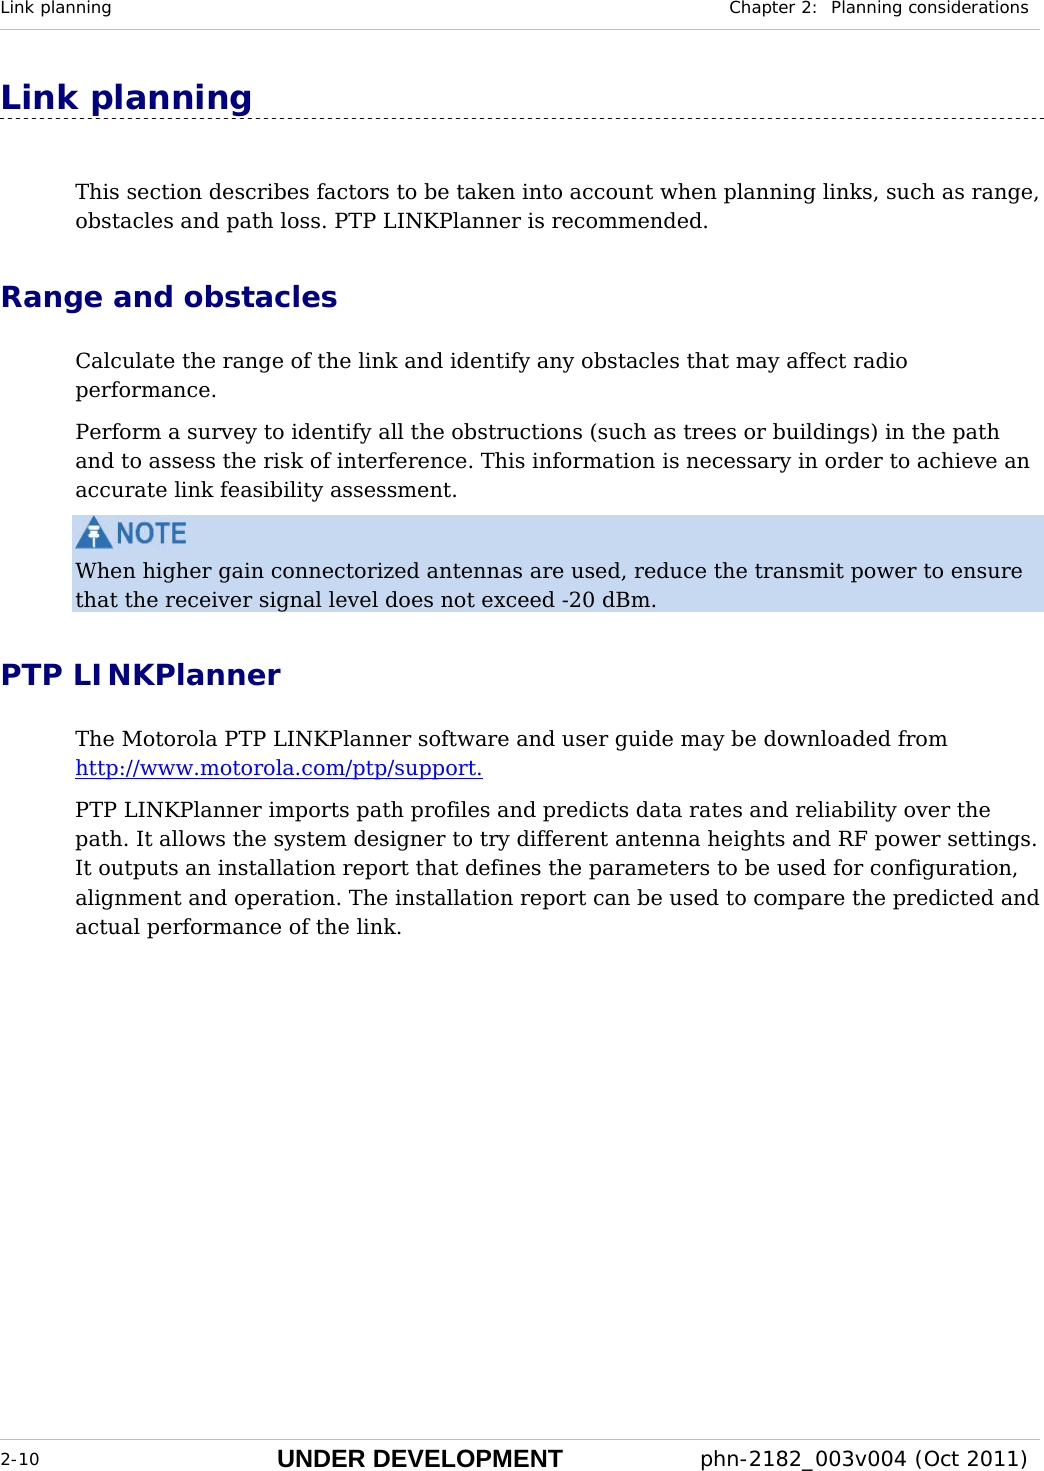 Link planning  Chapter 2:  Planning considerations  2-10 UNDER DEVELOPMENT  phn-2182_003v004 (Oct 2011)  Link planning This section describes factors to be taken into account when planning links, such as range, obstacles and path loss. PTP LINKPlanner is recommended.  Range and obstacles Calculate the range of the link and identify any obstacles that may affect radio performance. Perform a survey to identify all the obstructions (such as trees or buildings) in the path and to assess the risk of interference. This information is necessary in order to achieve an accurate link feasibility assessment.  When higher gain connectorized antennas are used, reduce the transmit power to ensure that the receiver signal level does not exceed -20 dBm. PTP LINKPlanner The Motorola PTP LINKPlanner software and user guide may be downloaded from http://www.motorola.com/ptp/support.  PTP LINKPlanner imports path profiles and predicts data rates and reliability over the path. It allows the system designer to try different antenna heights and RF power settings. It outputs an installation report that defines the parameters to be used for configuration, alignment and operation. The installation report can be used to compare the predicted and actual performance of the link. 